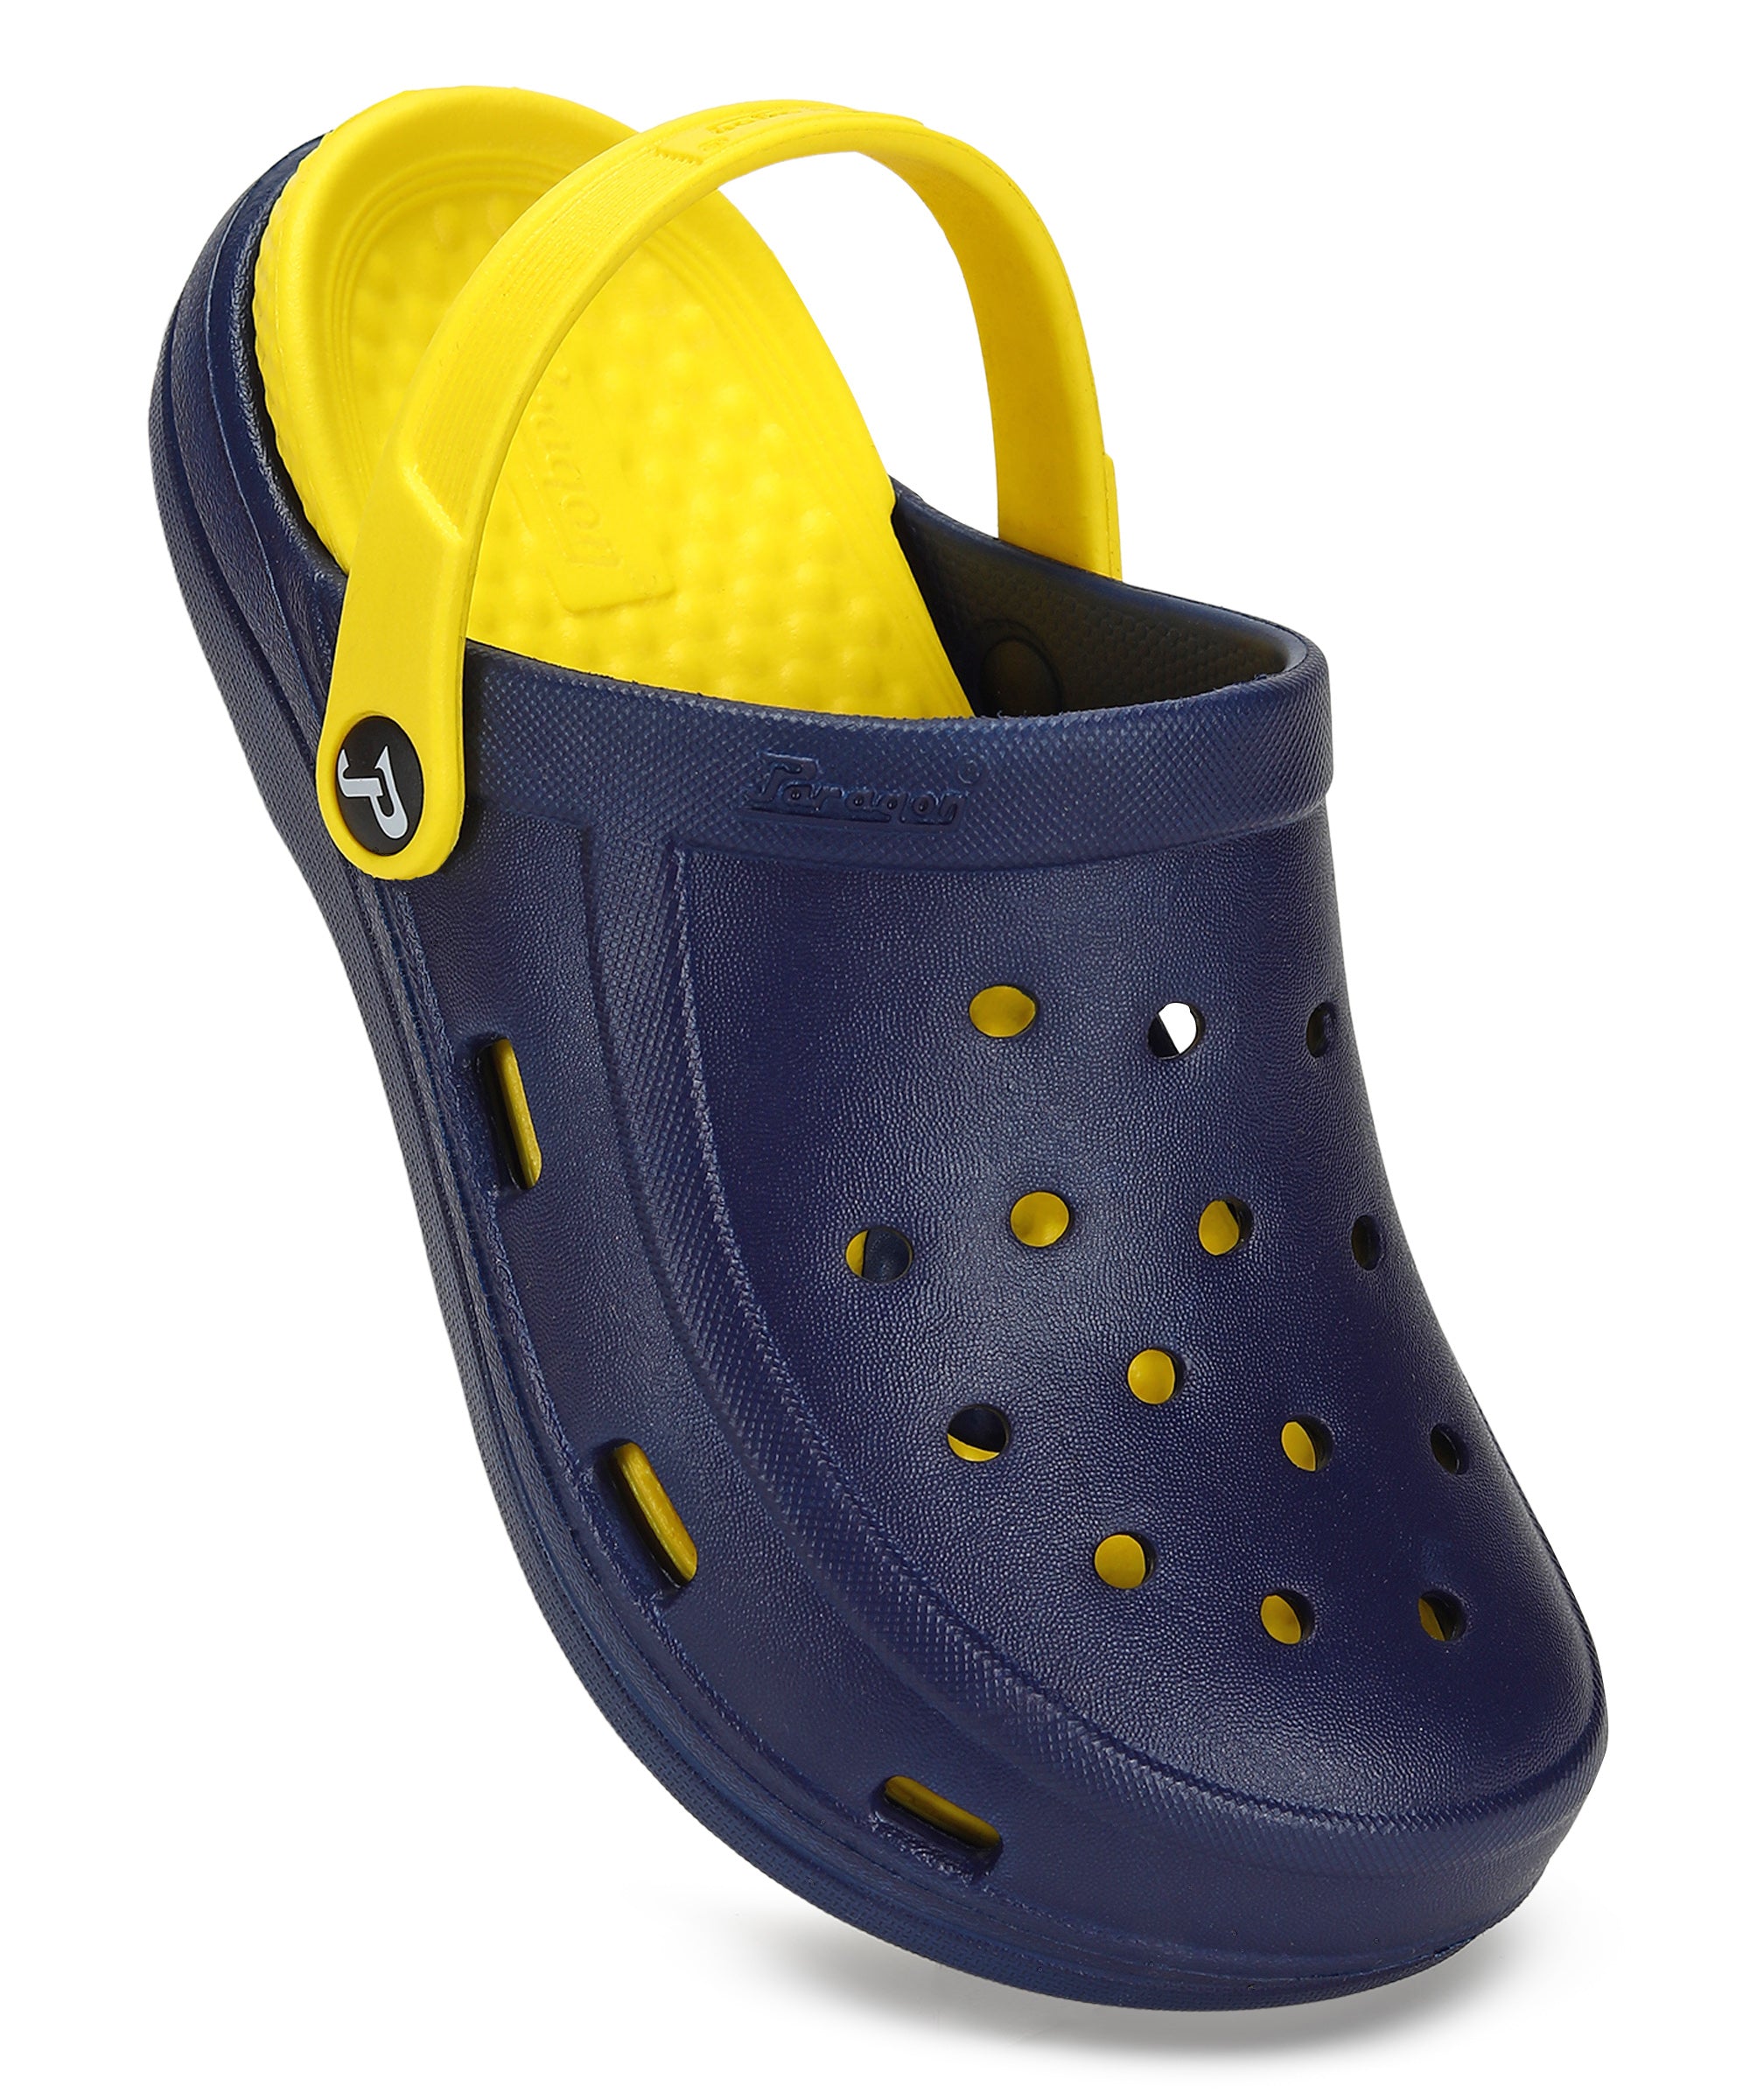 Paragon EVK8004C Unisex Clogs For Kids | Outdoor and Indoor Casual, Durable Clogs